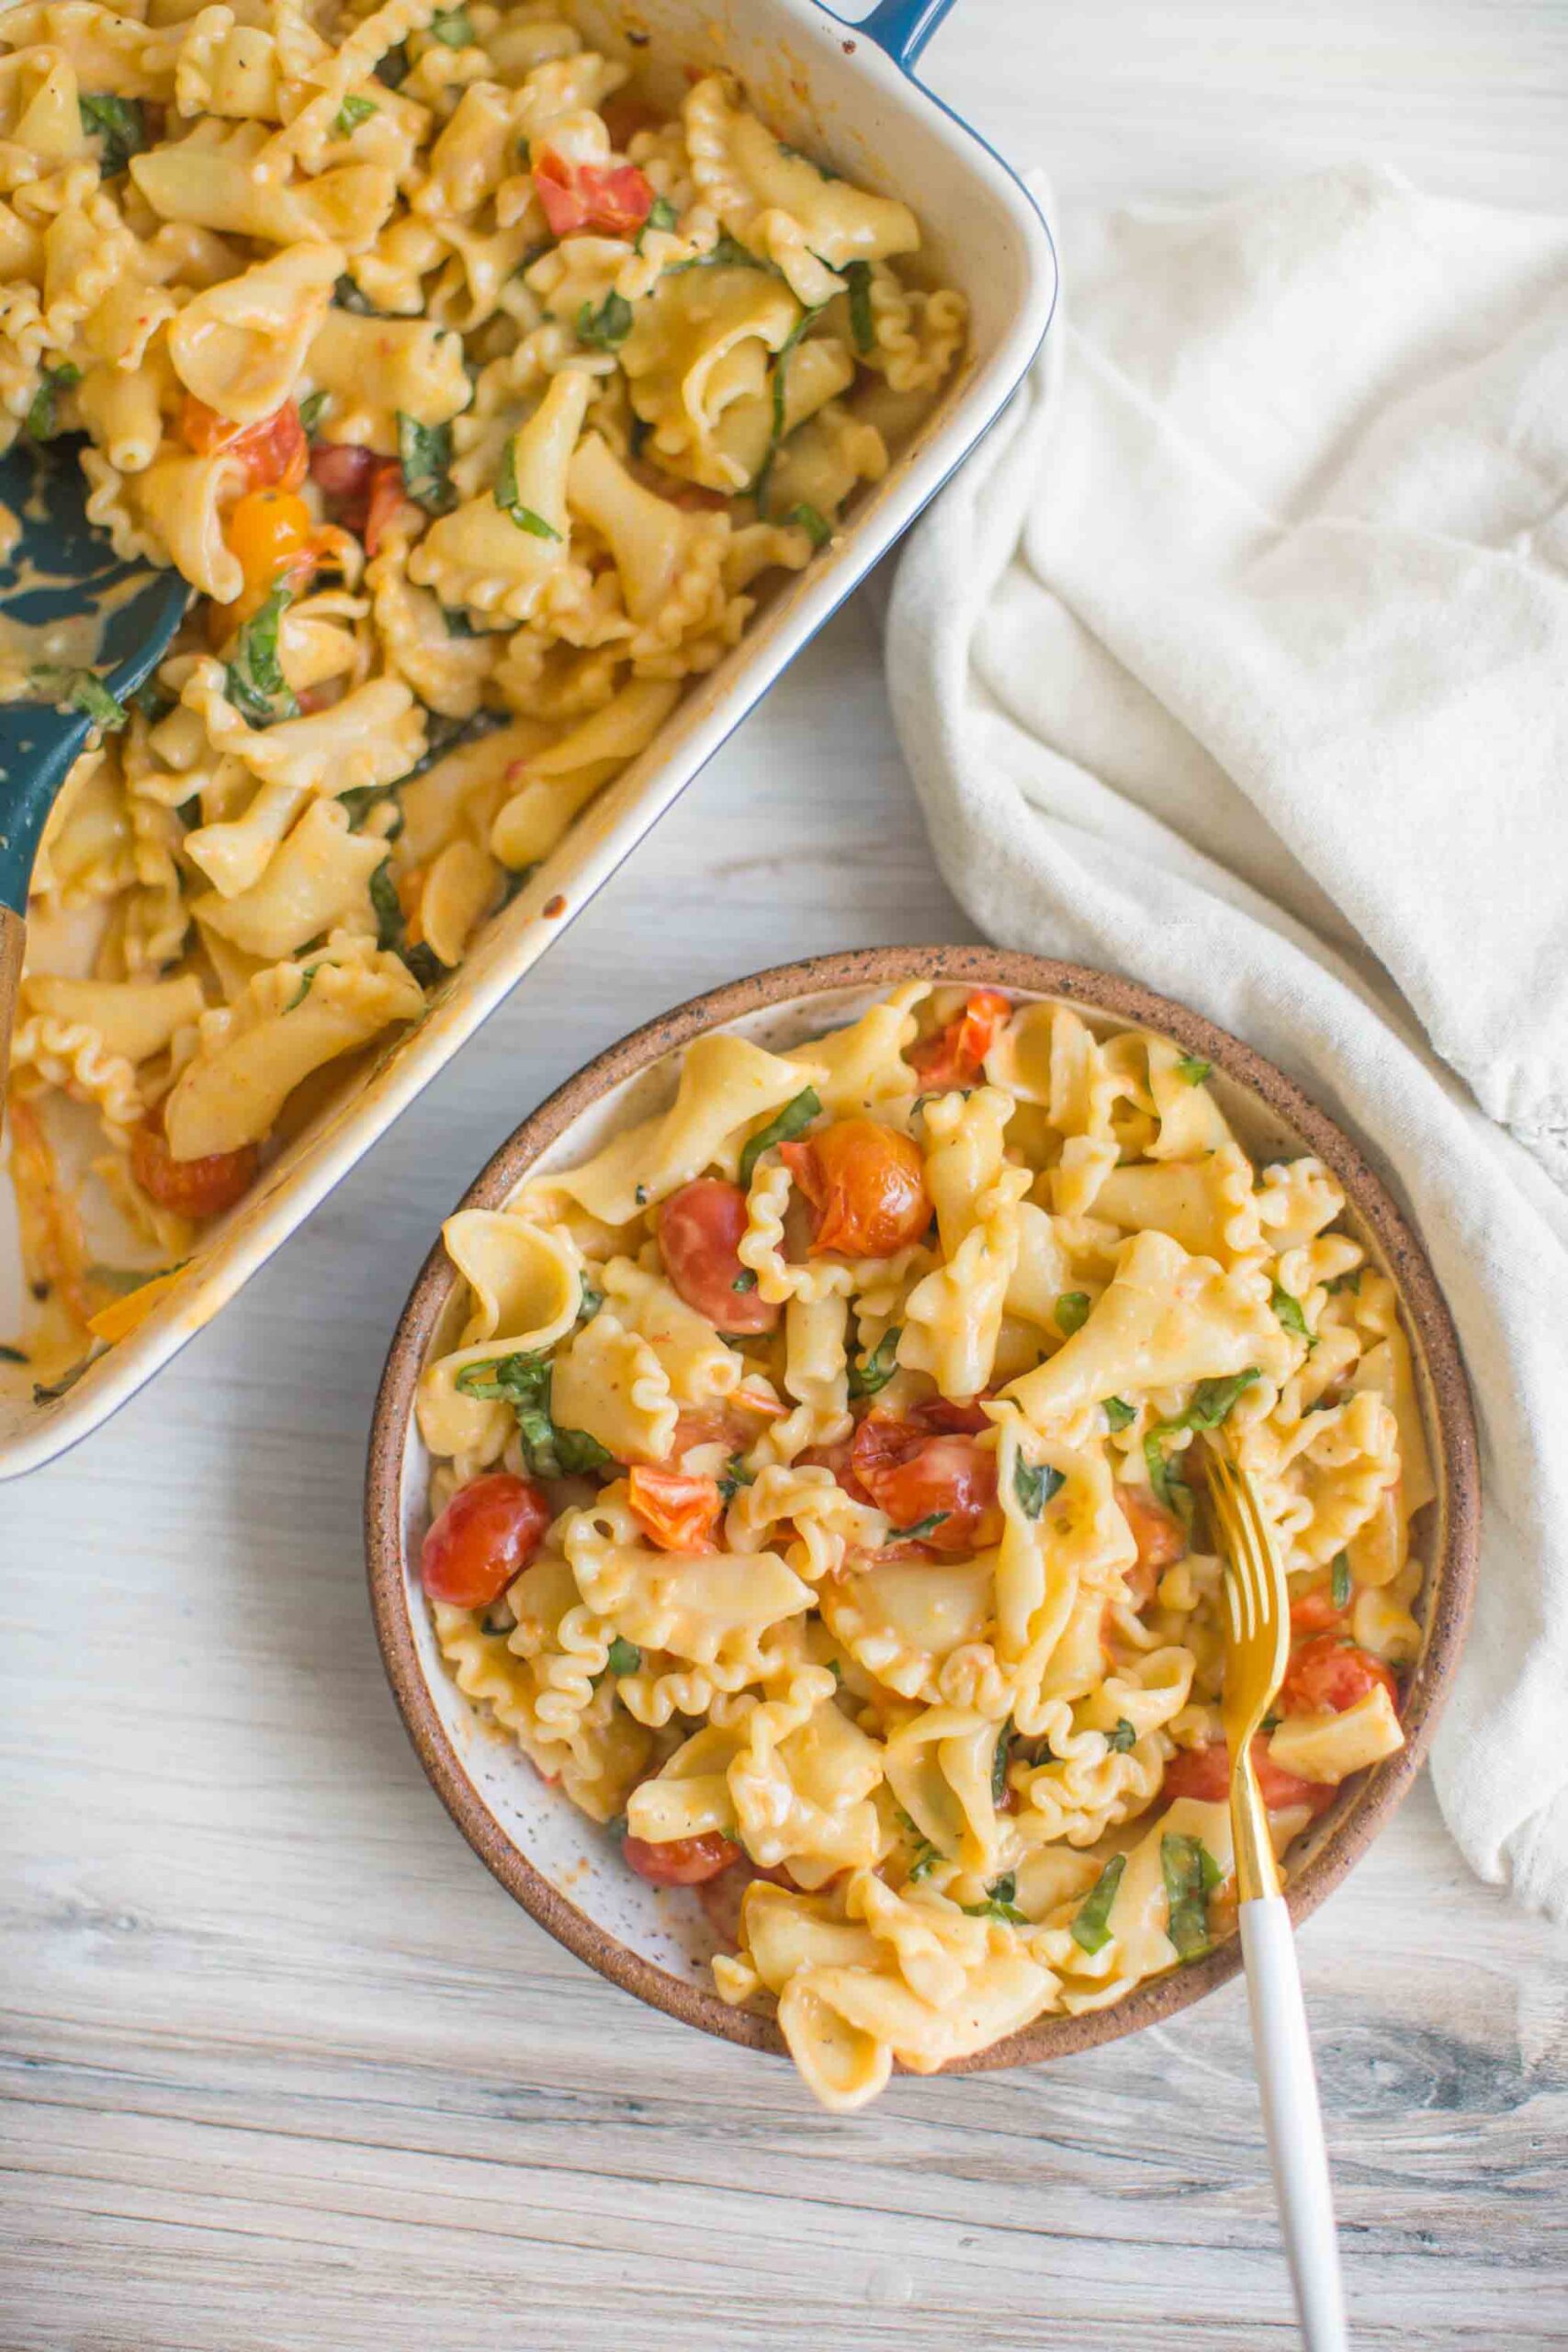 Easy Vegan Baked Feta Pasta Casserole With Vegan Feta Cheese and Tomatoes and Basil